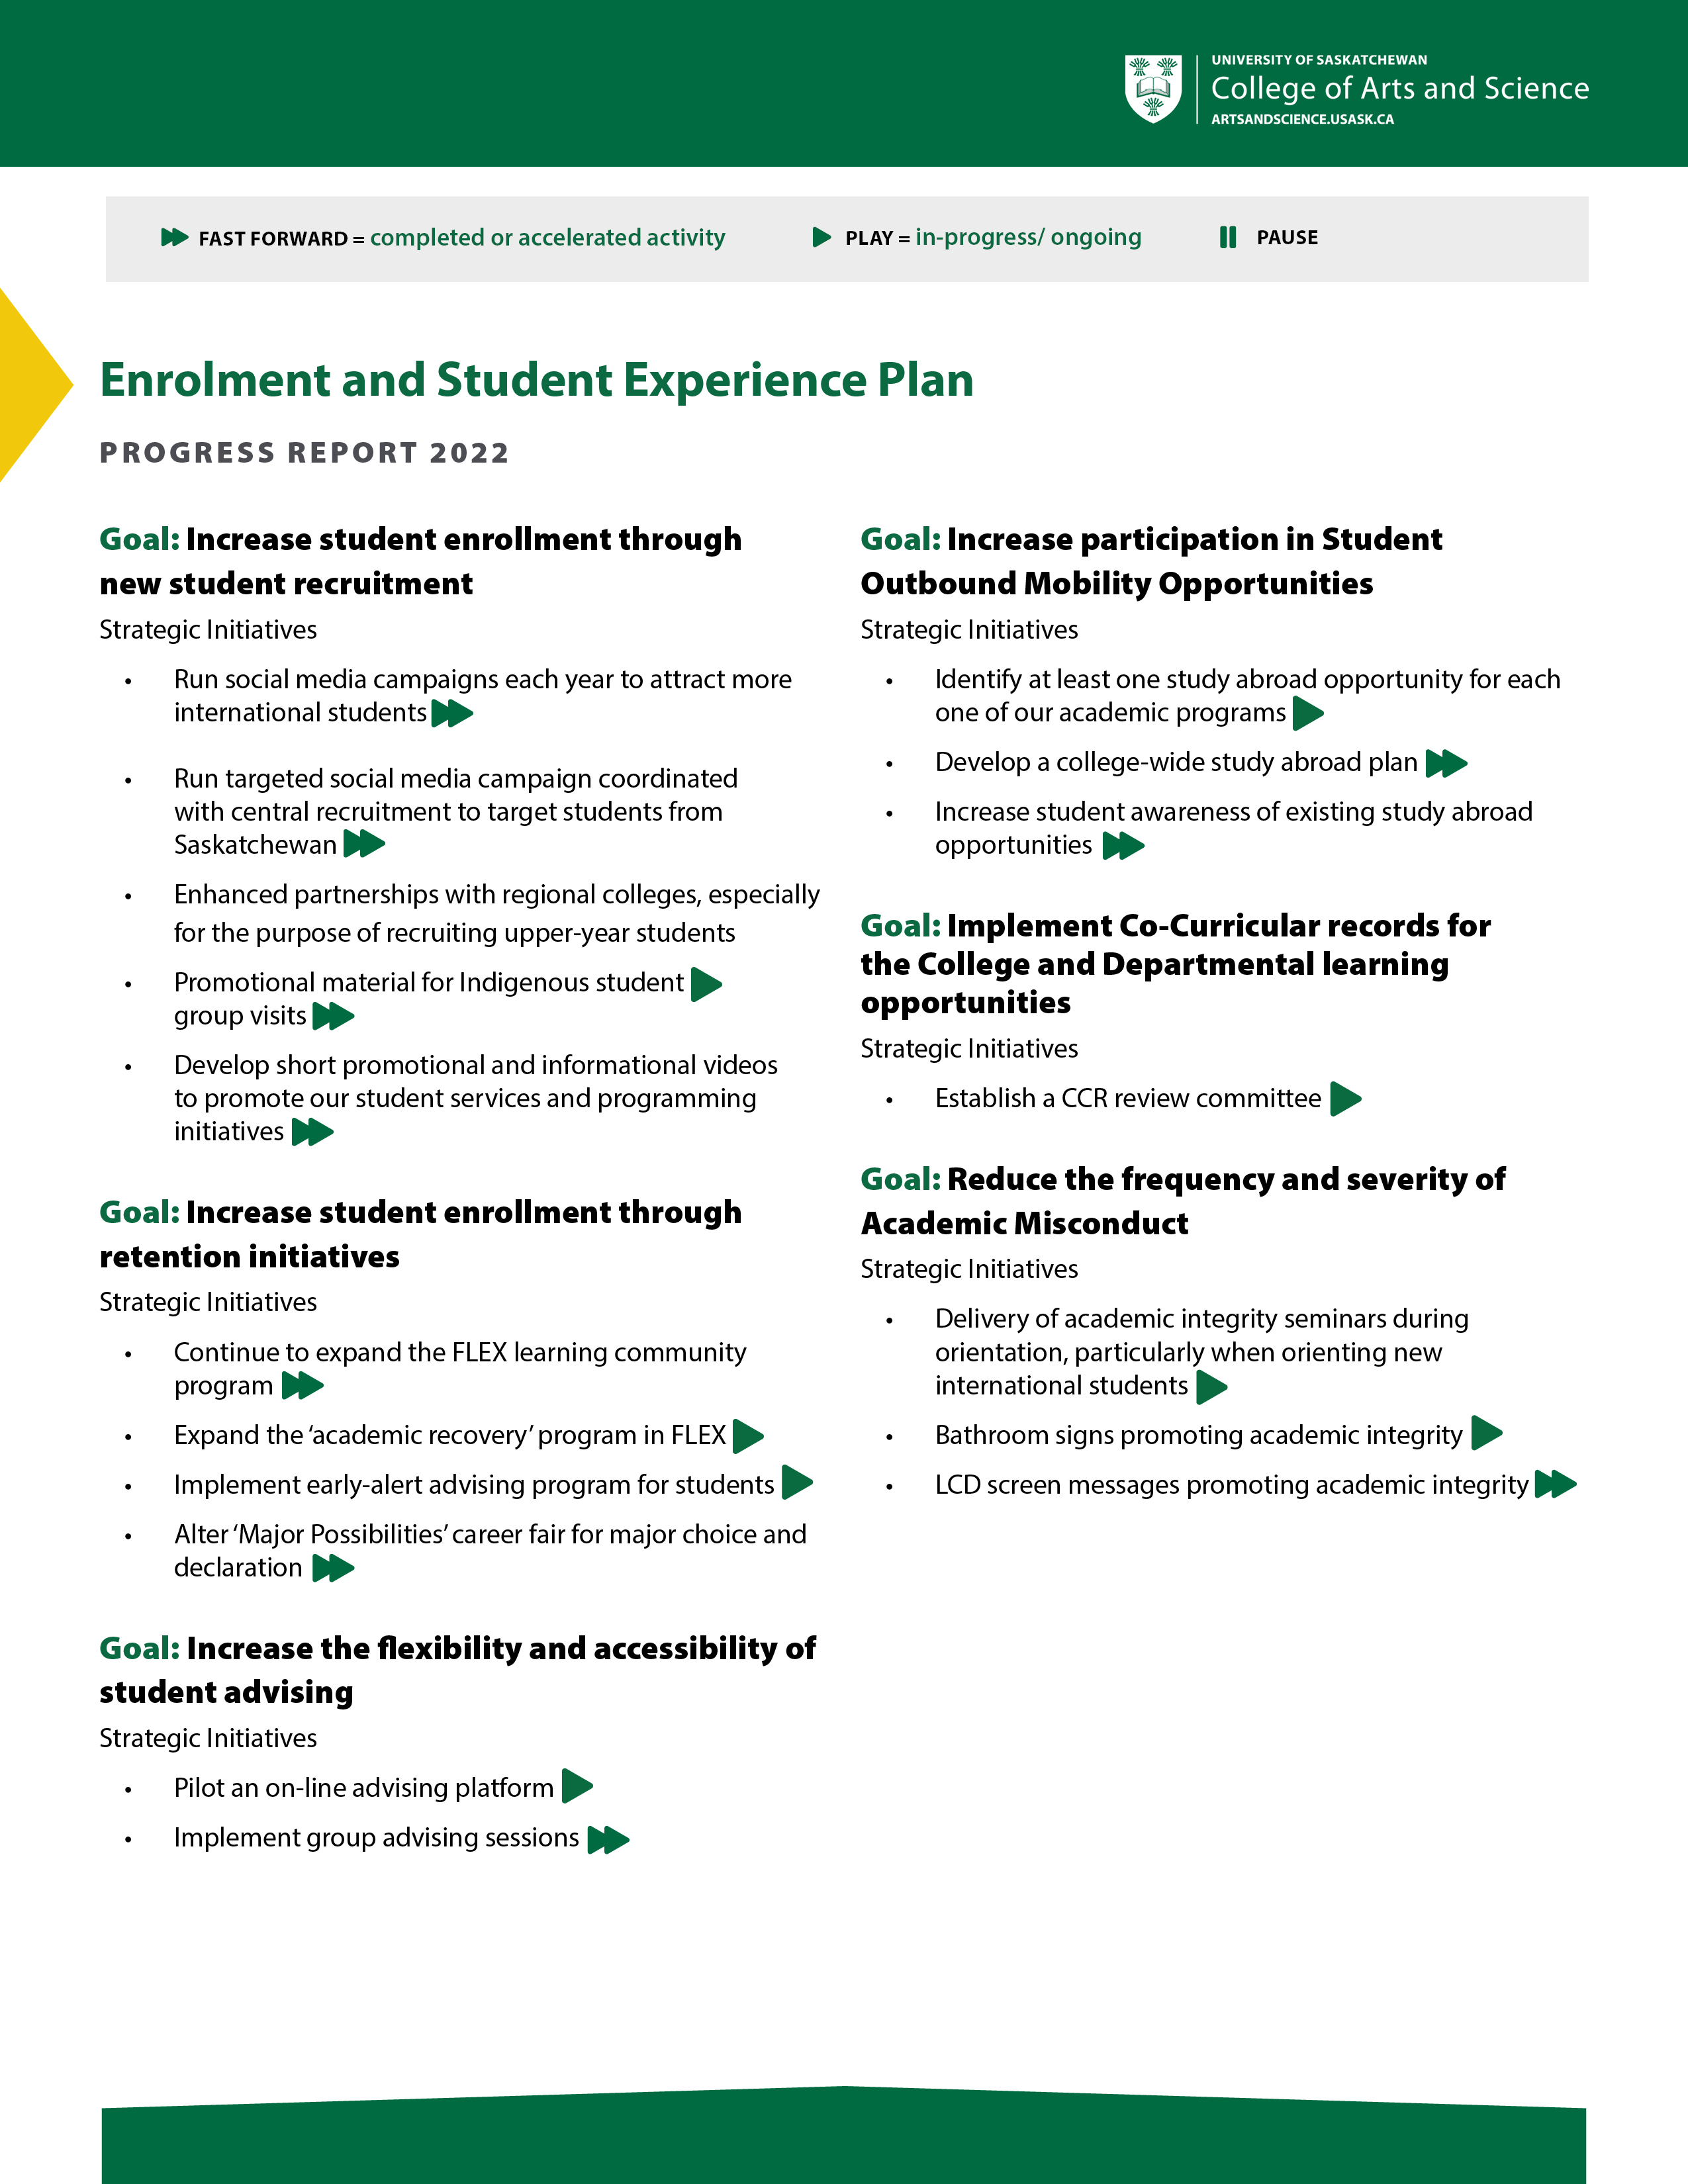 enrolment-and-student-experience-plan.jpg